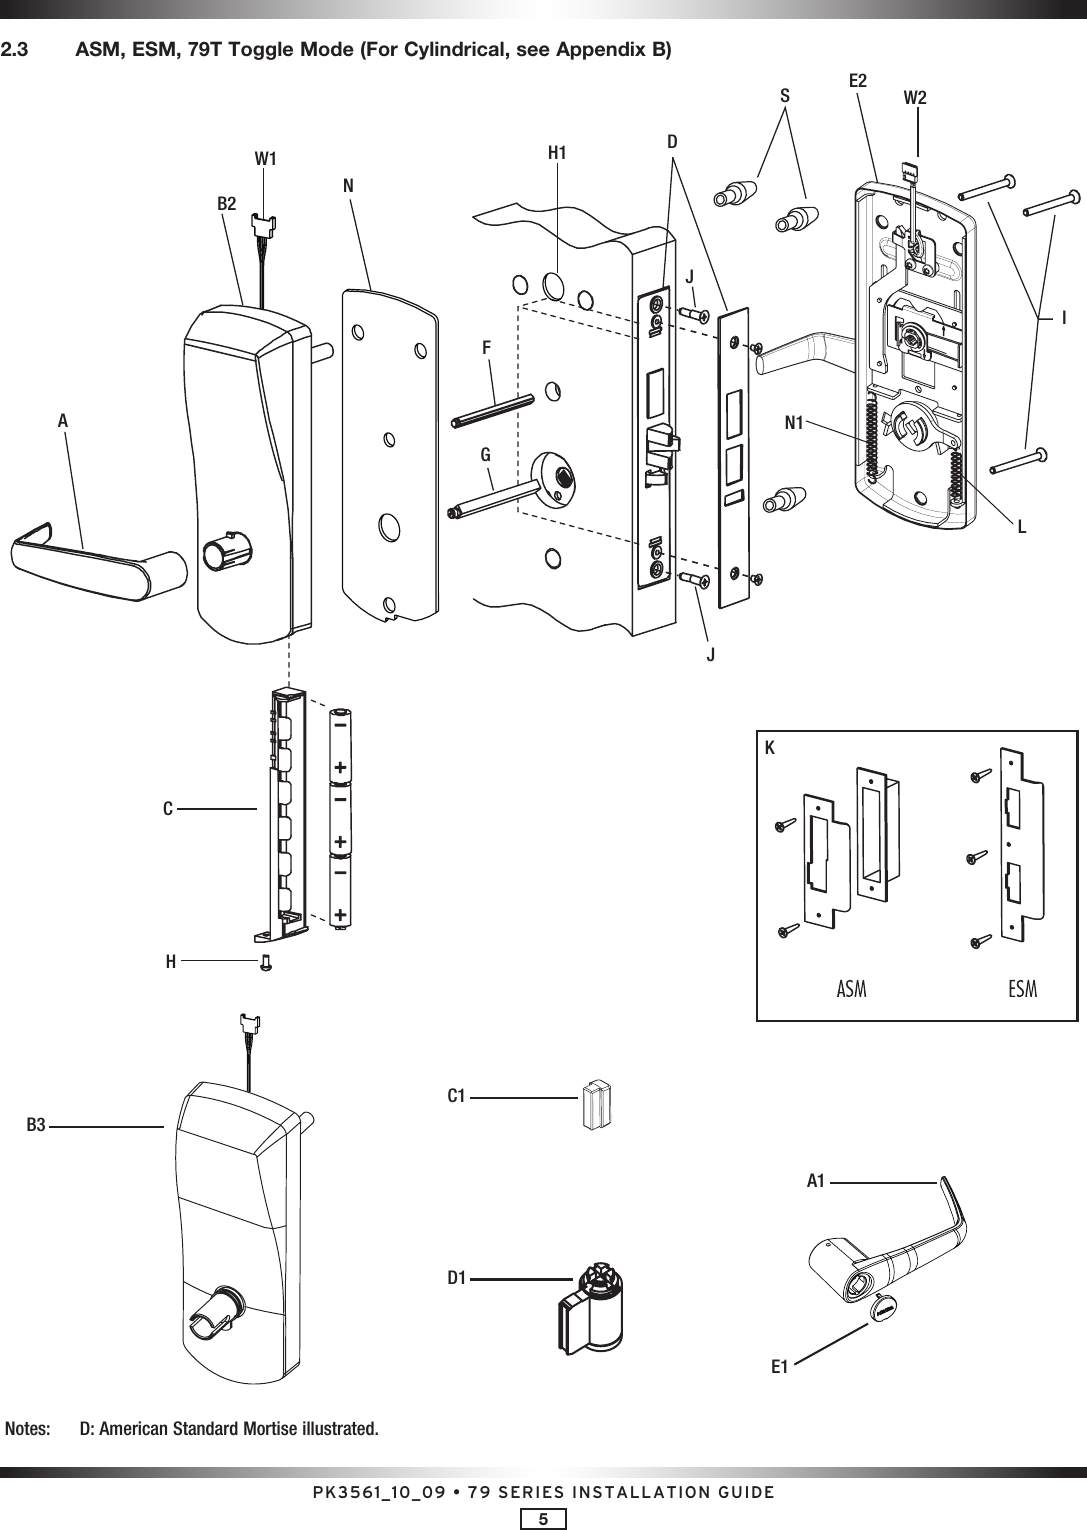 PK3561_10_09 • 79 SERIES INSTALLATION GUIDE5Notes:  D: American Standard Mortise illustrated.ACHB2W1W2N1H1NFDSGJJLIE2KB3D1C1A1E12.3    ASM, ESM, 79T Toggle Mode (For Cylindrical, see Appendix B)